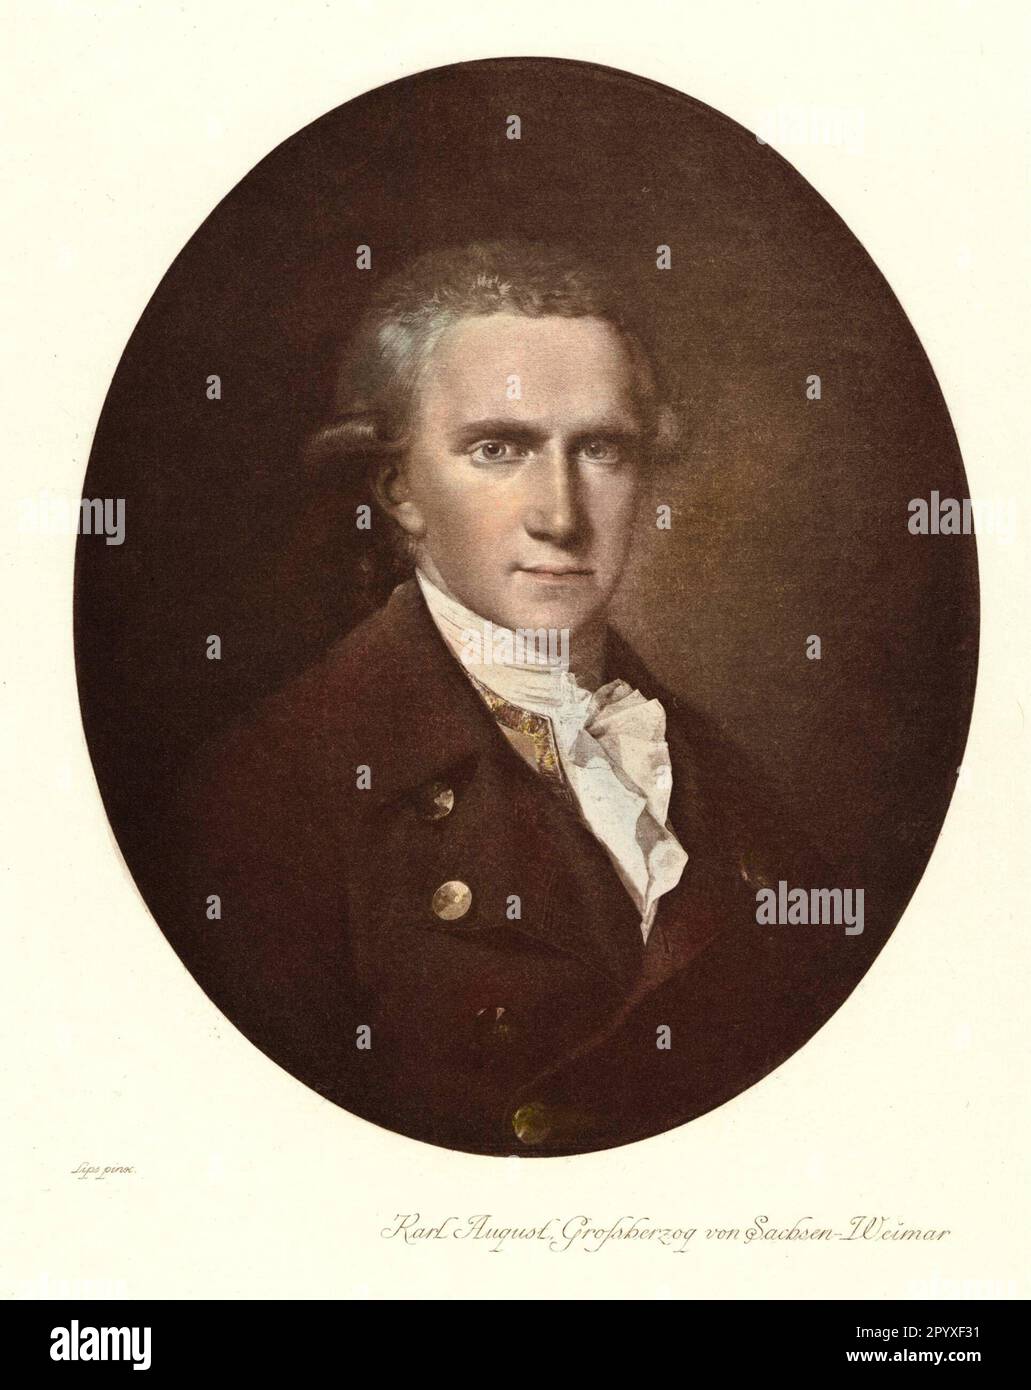 Karl August (1757-1828), Grand Duke of Saxe-Weimar. His friendship with Johann Wolfgang Goethe made Weimar and Jena centers of German intellectual life. Photo: Heliogravure, Corpus Imaginum, Hanfstaengl Collection. [automated translation] Stock Photo